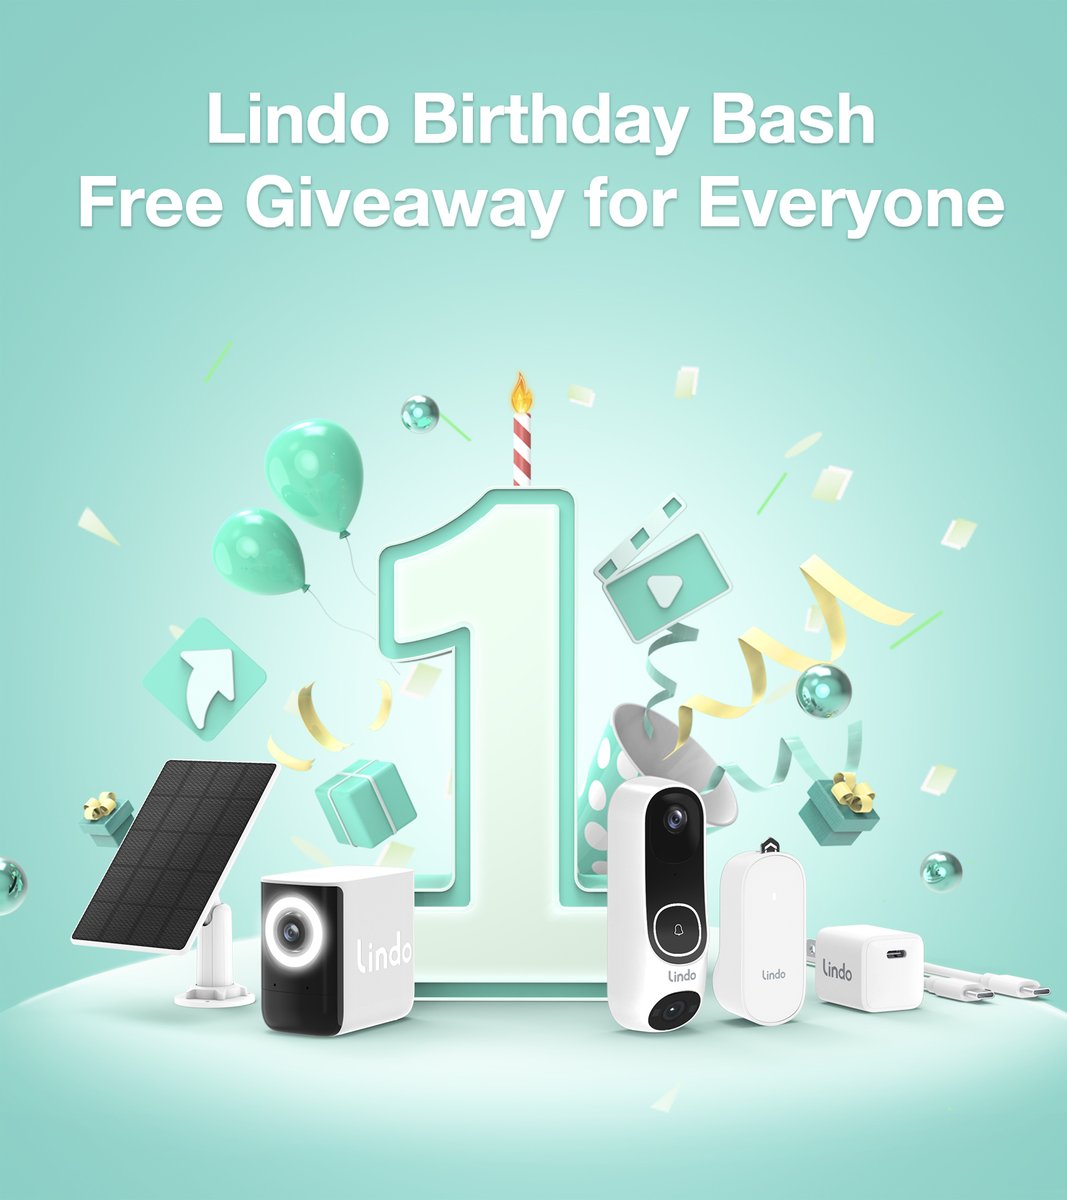 🎉 Join the Celebration: Lindo's Birthday Party!🎉
📸 Share your video clips captured by Lindo device, and get the gift from Lindo!
Learn More about the Party: lindolife.com/pages/lindos-b…

#CapturedbyLindoCamera #HappyBirthdayLindo